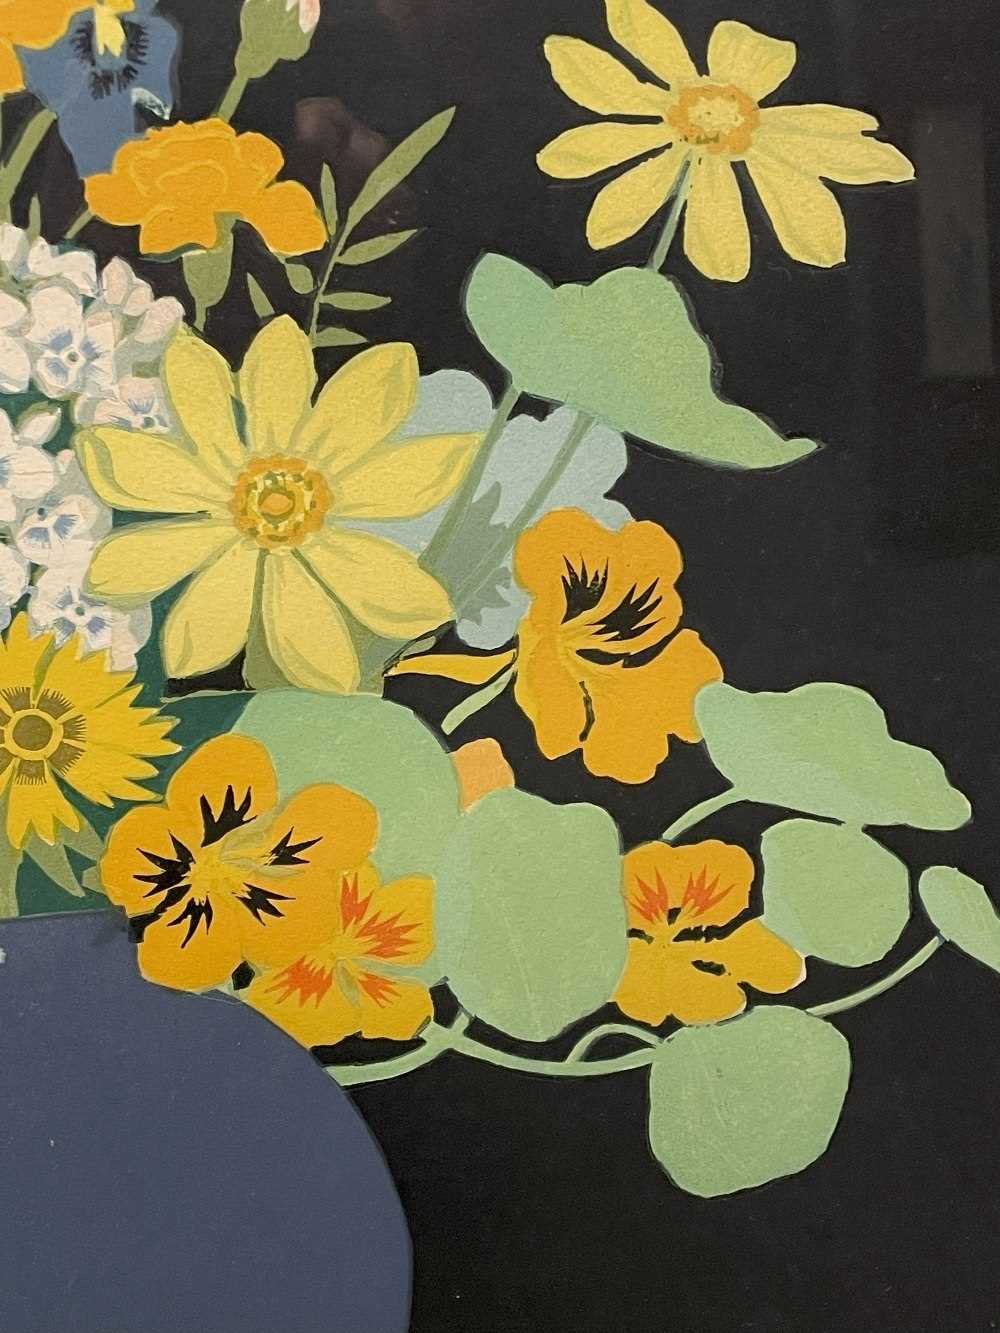 JOHN HALL THORPE (1874-1947) woodcut - The Country Bunch, wildflowers in a blue vase with window - Image 2 of 17